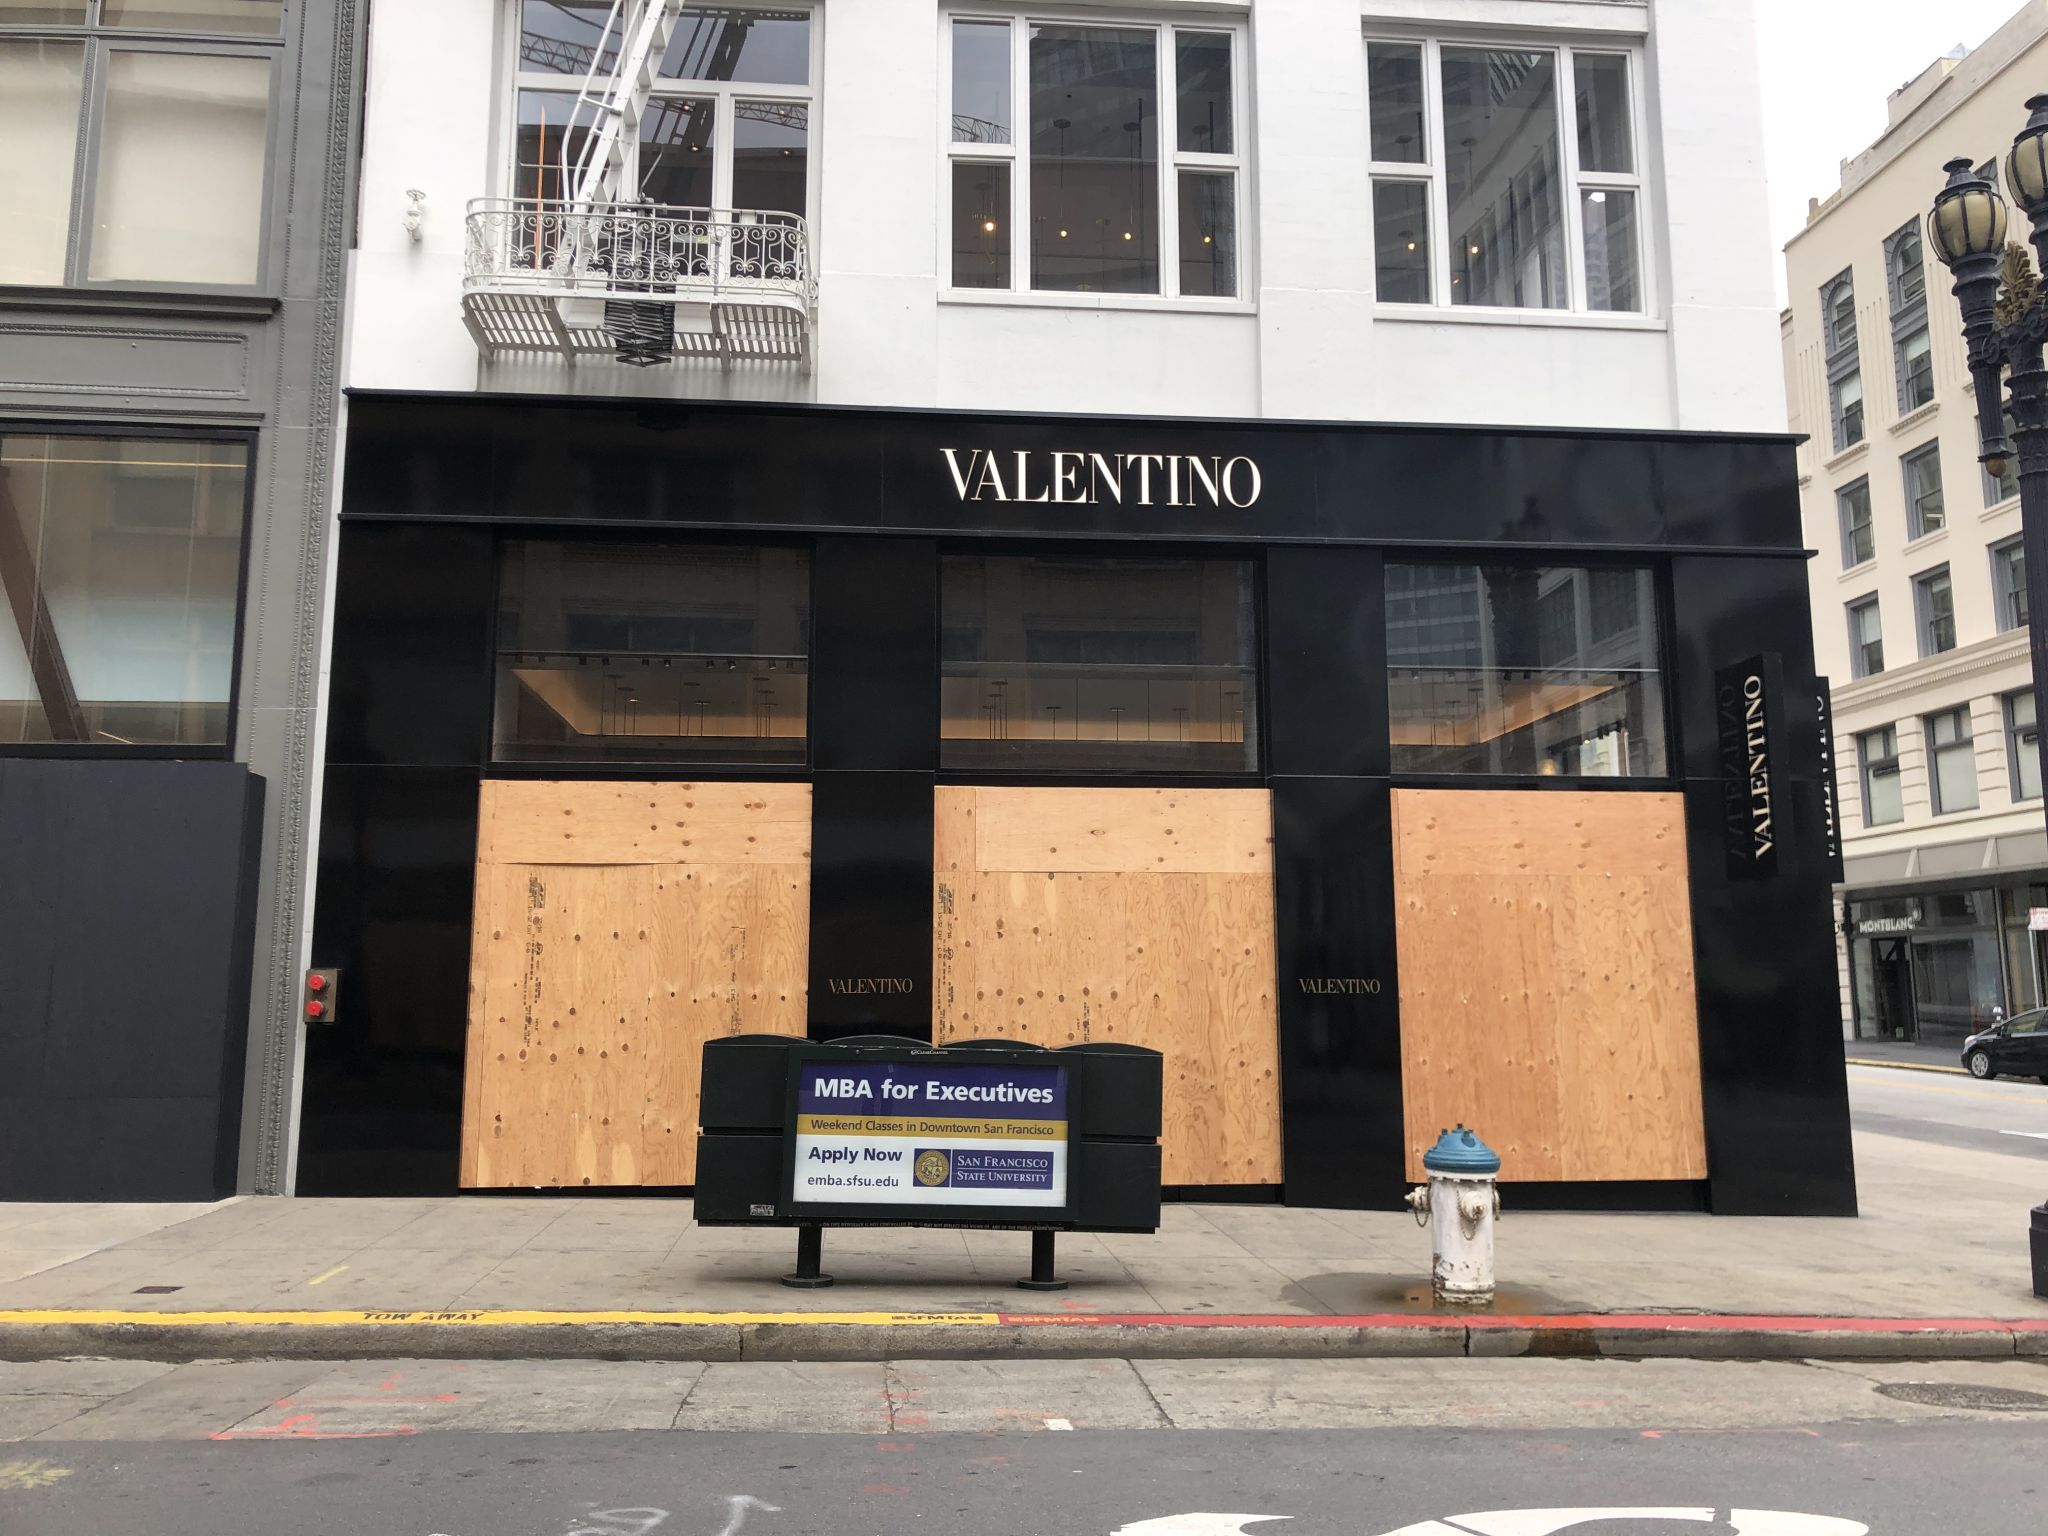 See the boarded-up designer storefronts in San Francisco's Union Square